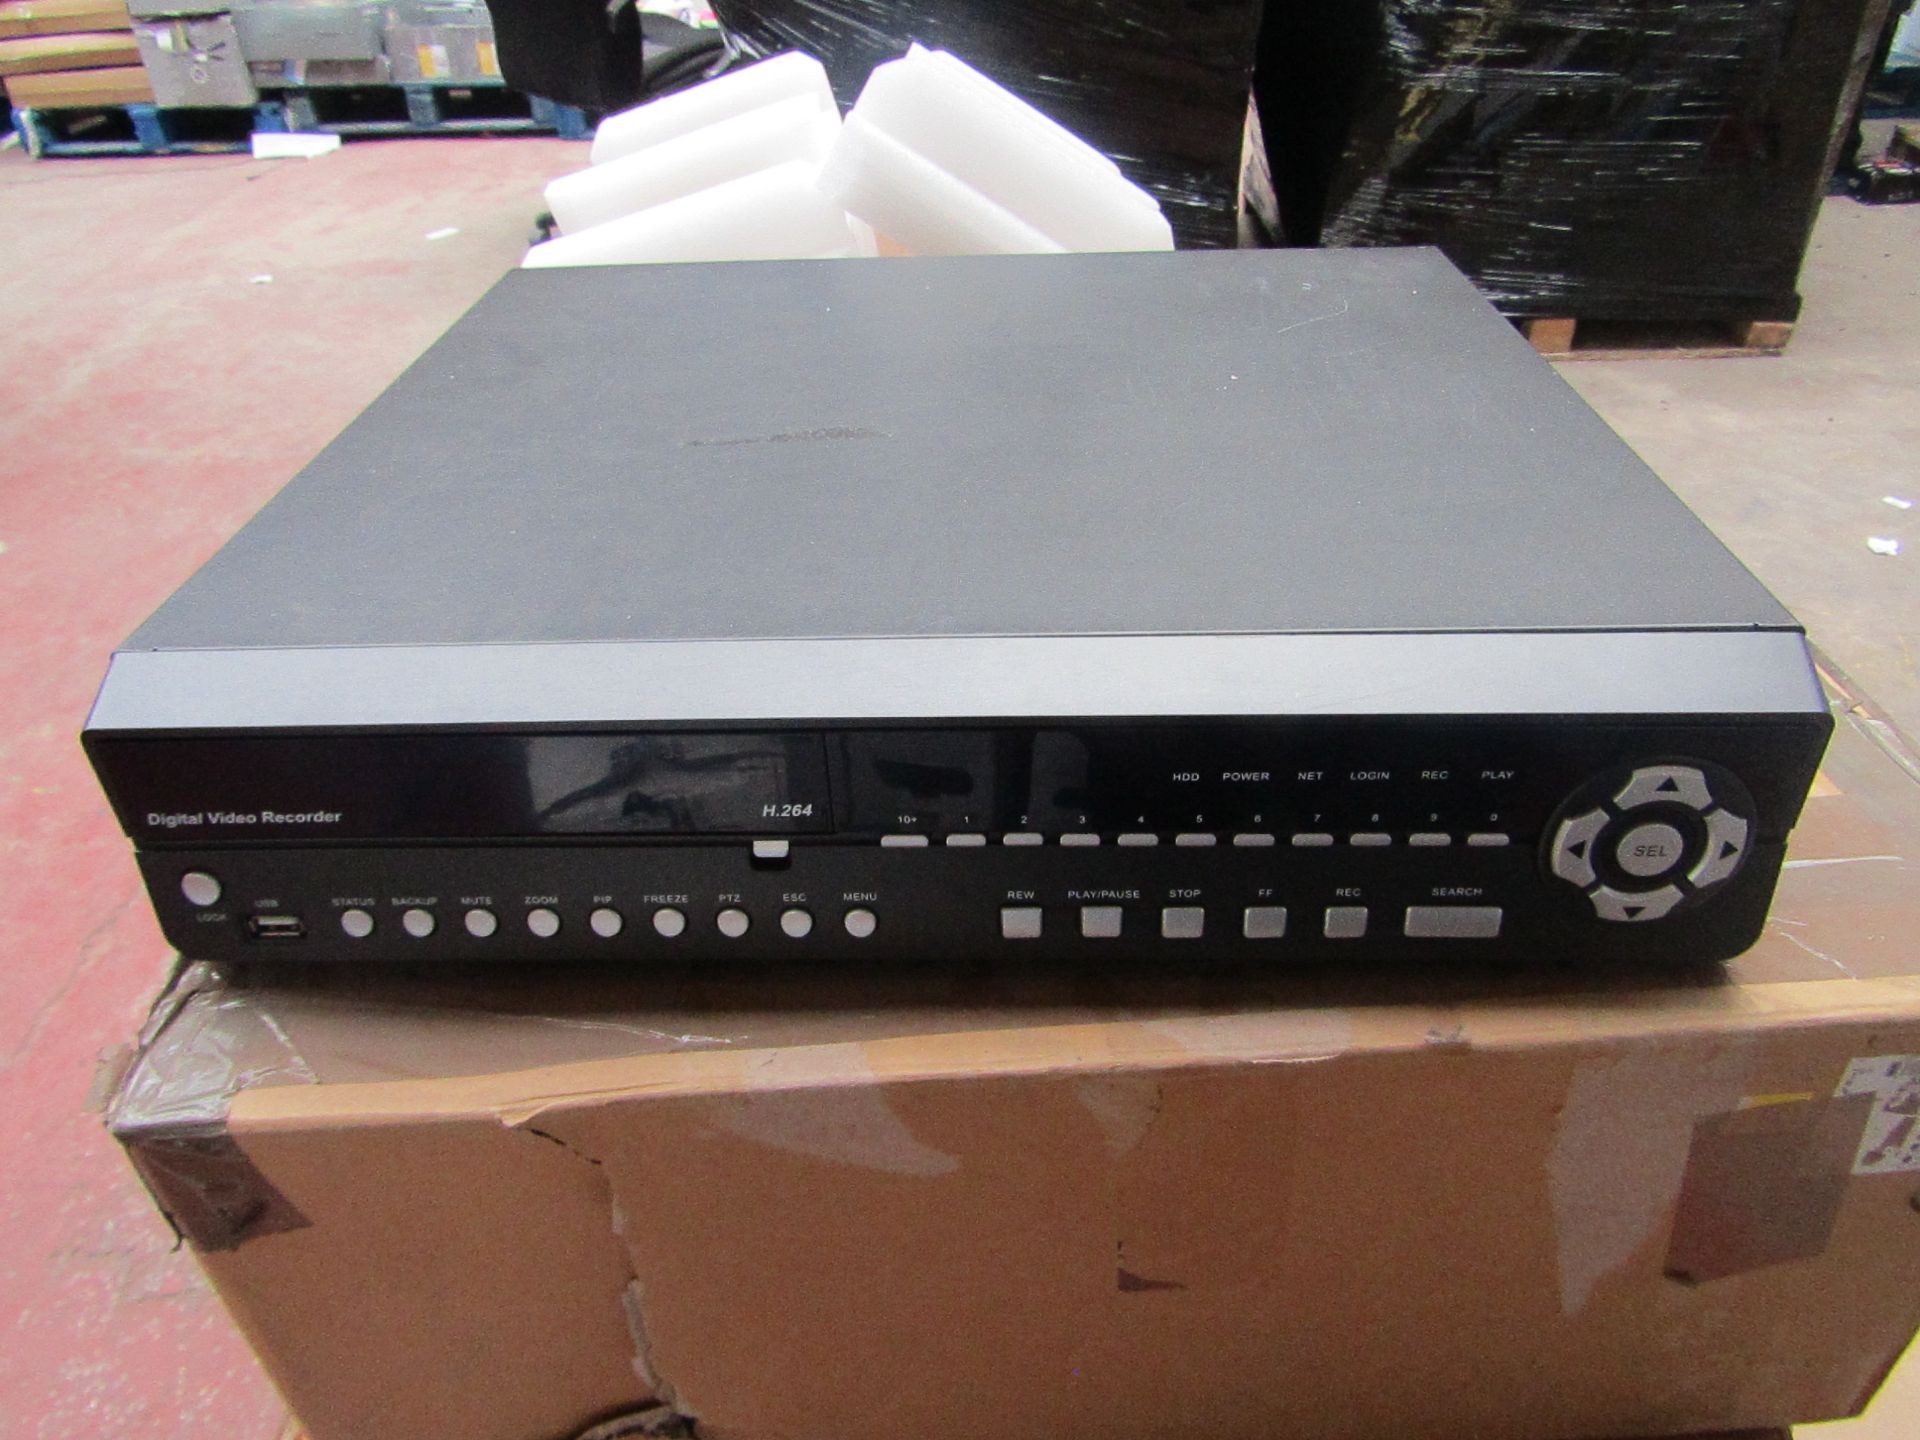 DIGITAL VIDEO RECORDER FOR CCTV UNITS, APPEARS TO BE IN GOOD CONDITION AND APPEARS TO HAVE ALL PARTS